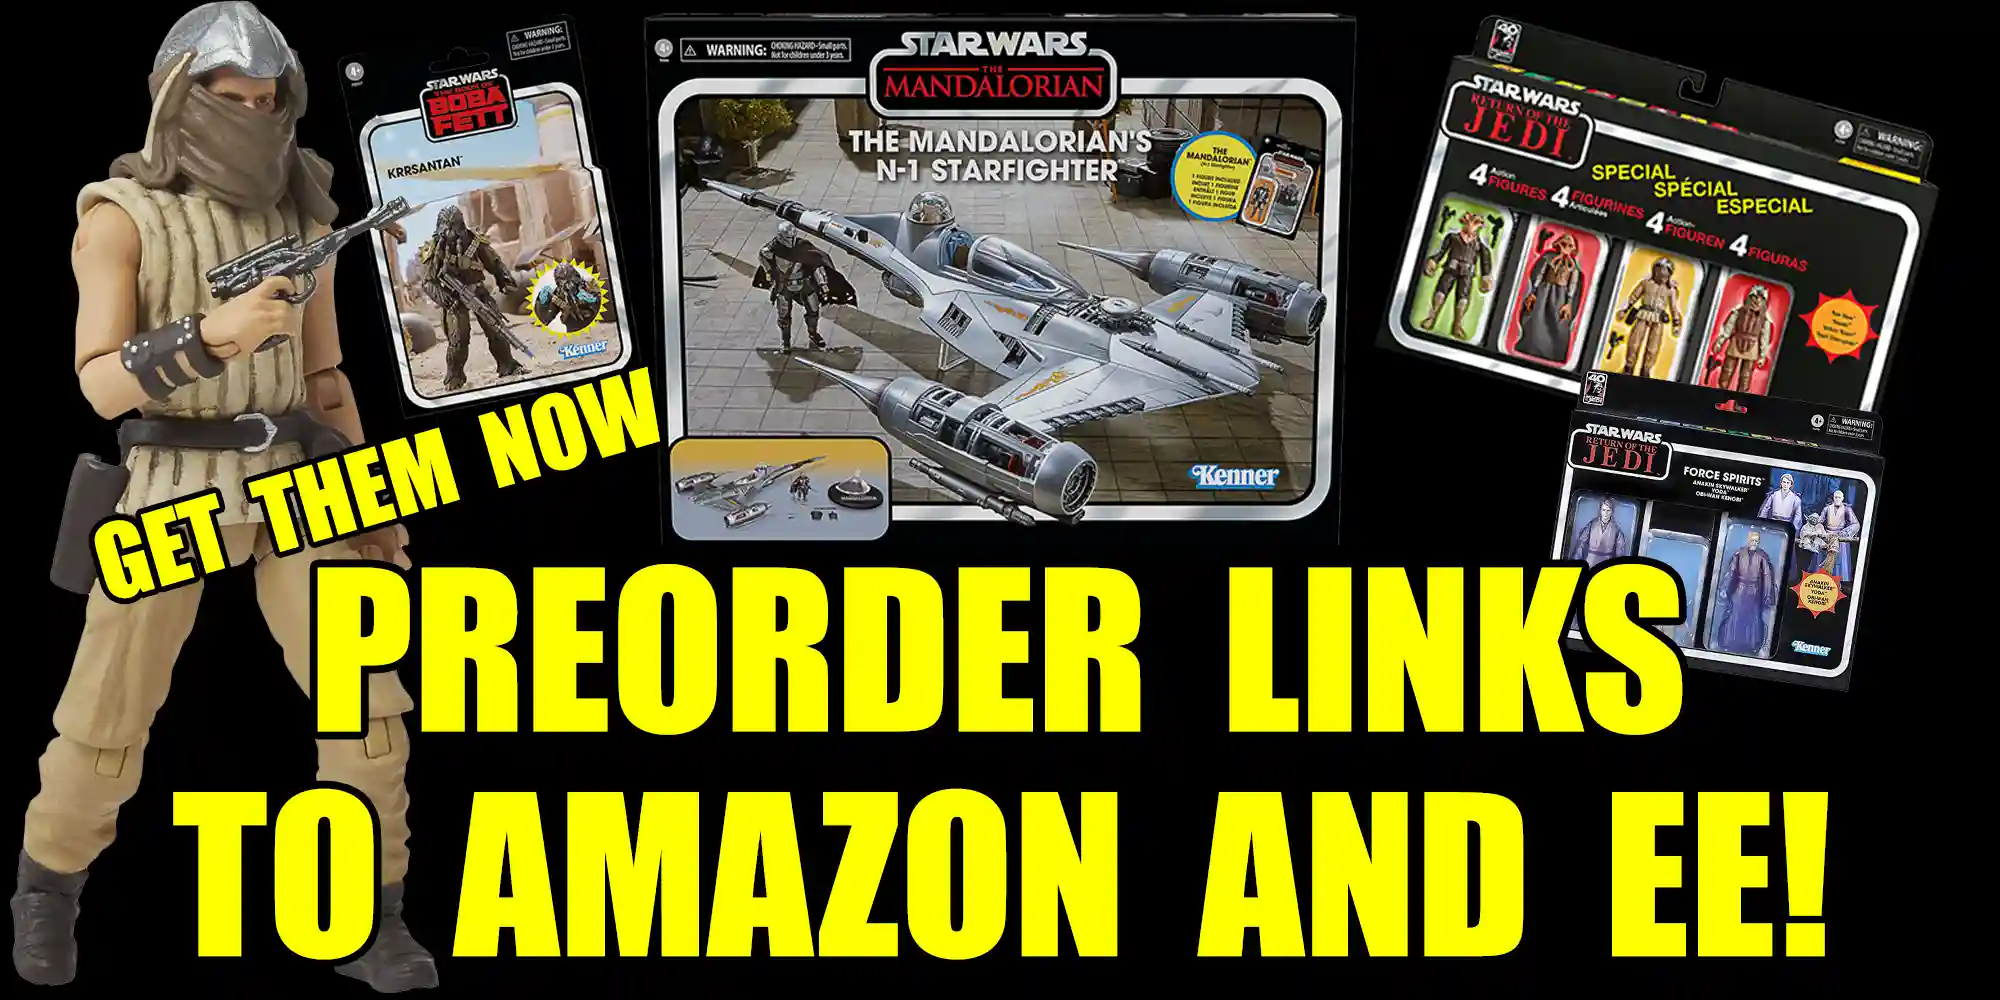 Get Them Now! All The Links To Amazon And Entertainment Earth!